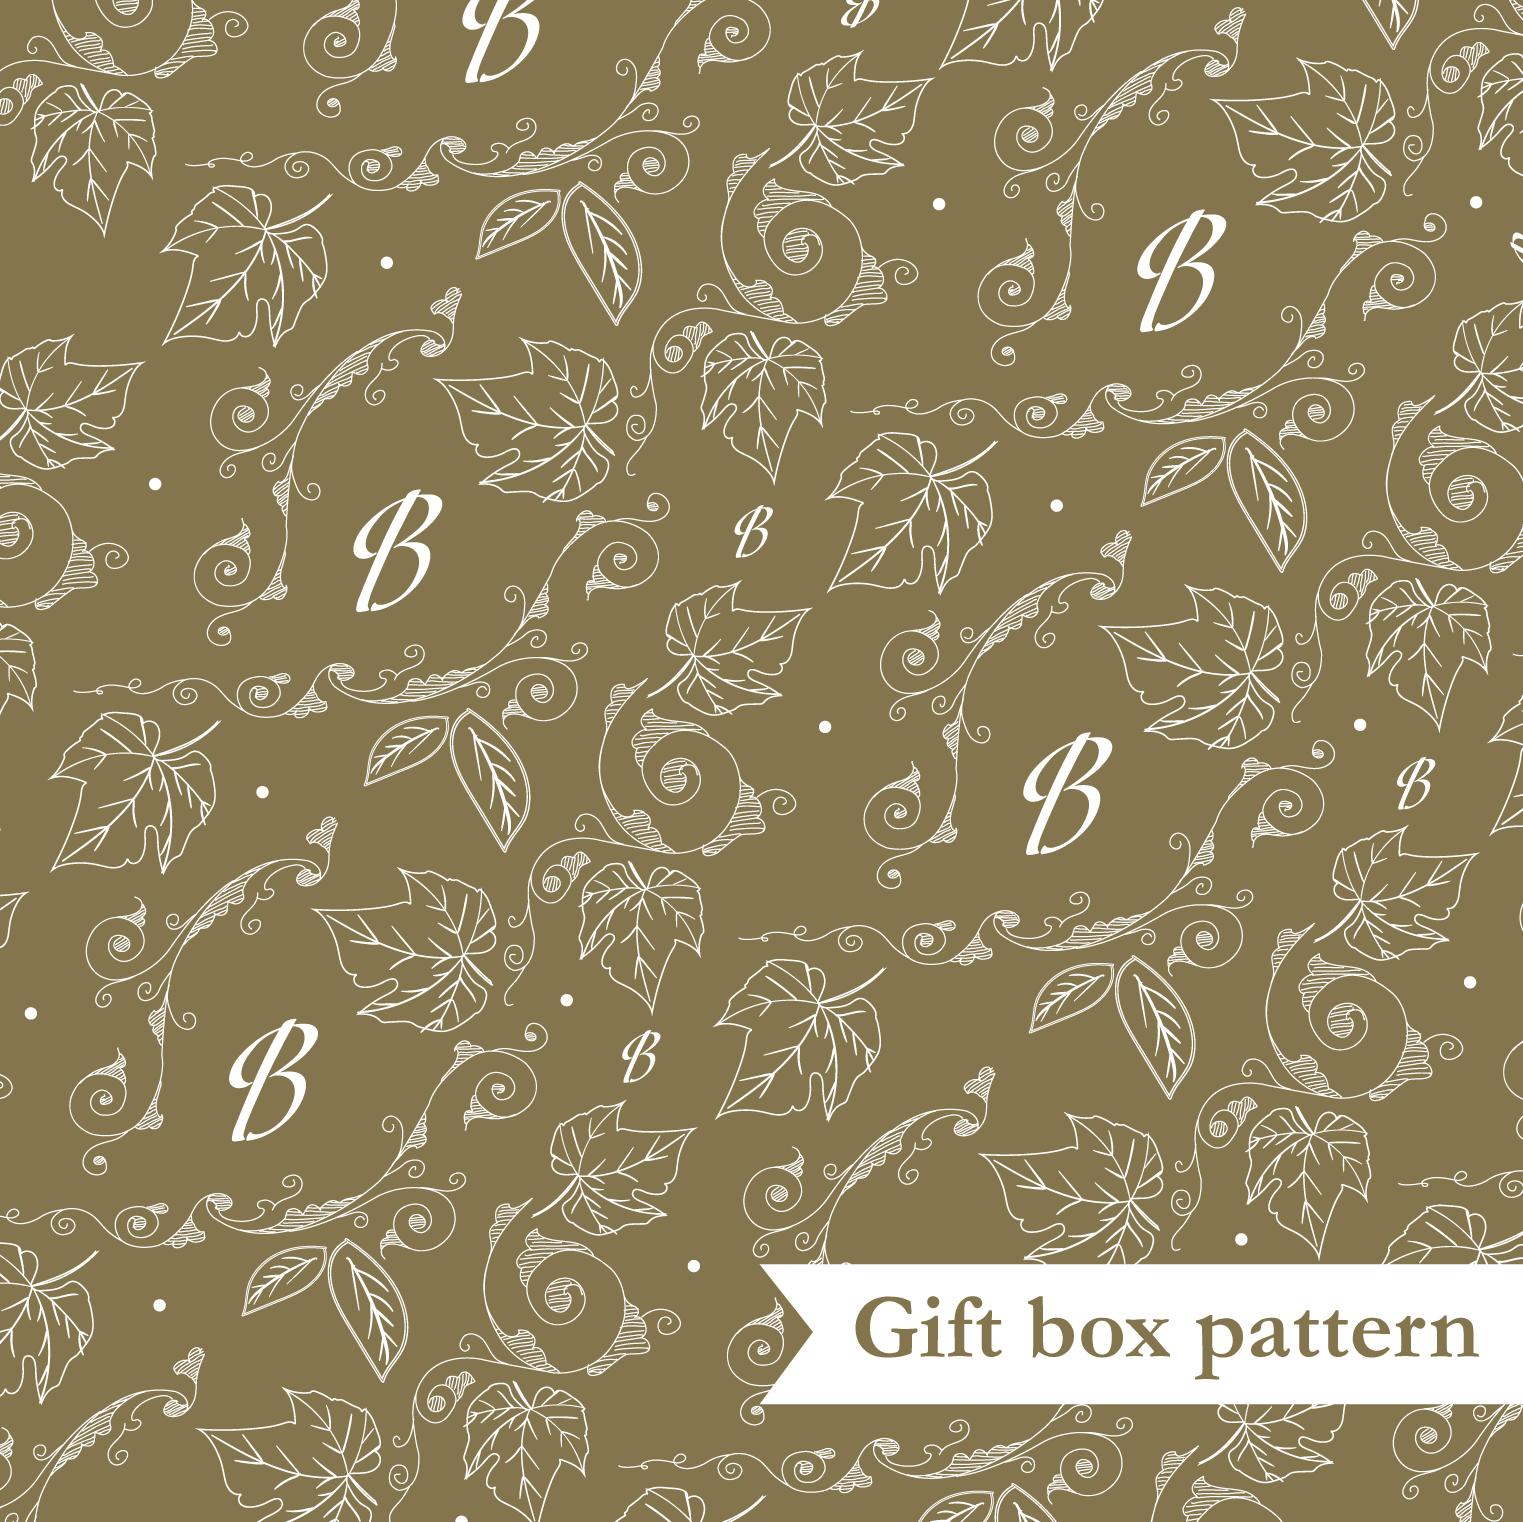 Image displays artwork sample of the Fine Vines Gold Gift Box pattern, which is a brand gold background with cream Botham's 'B's and vines & leaves.